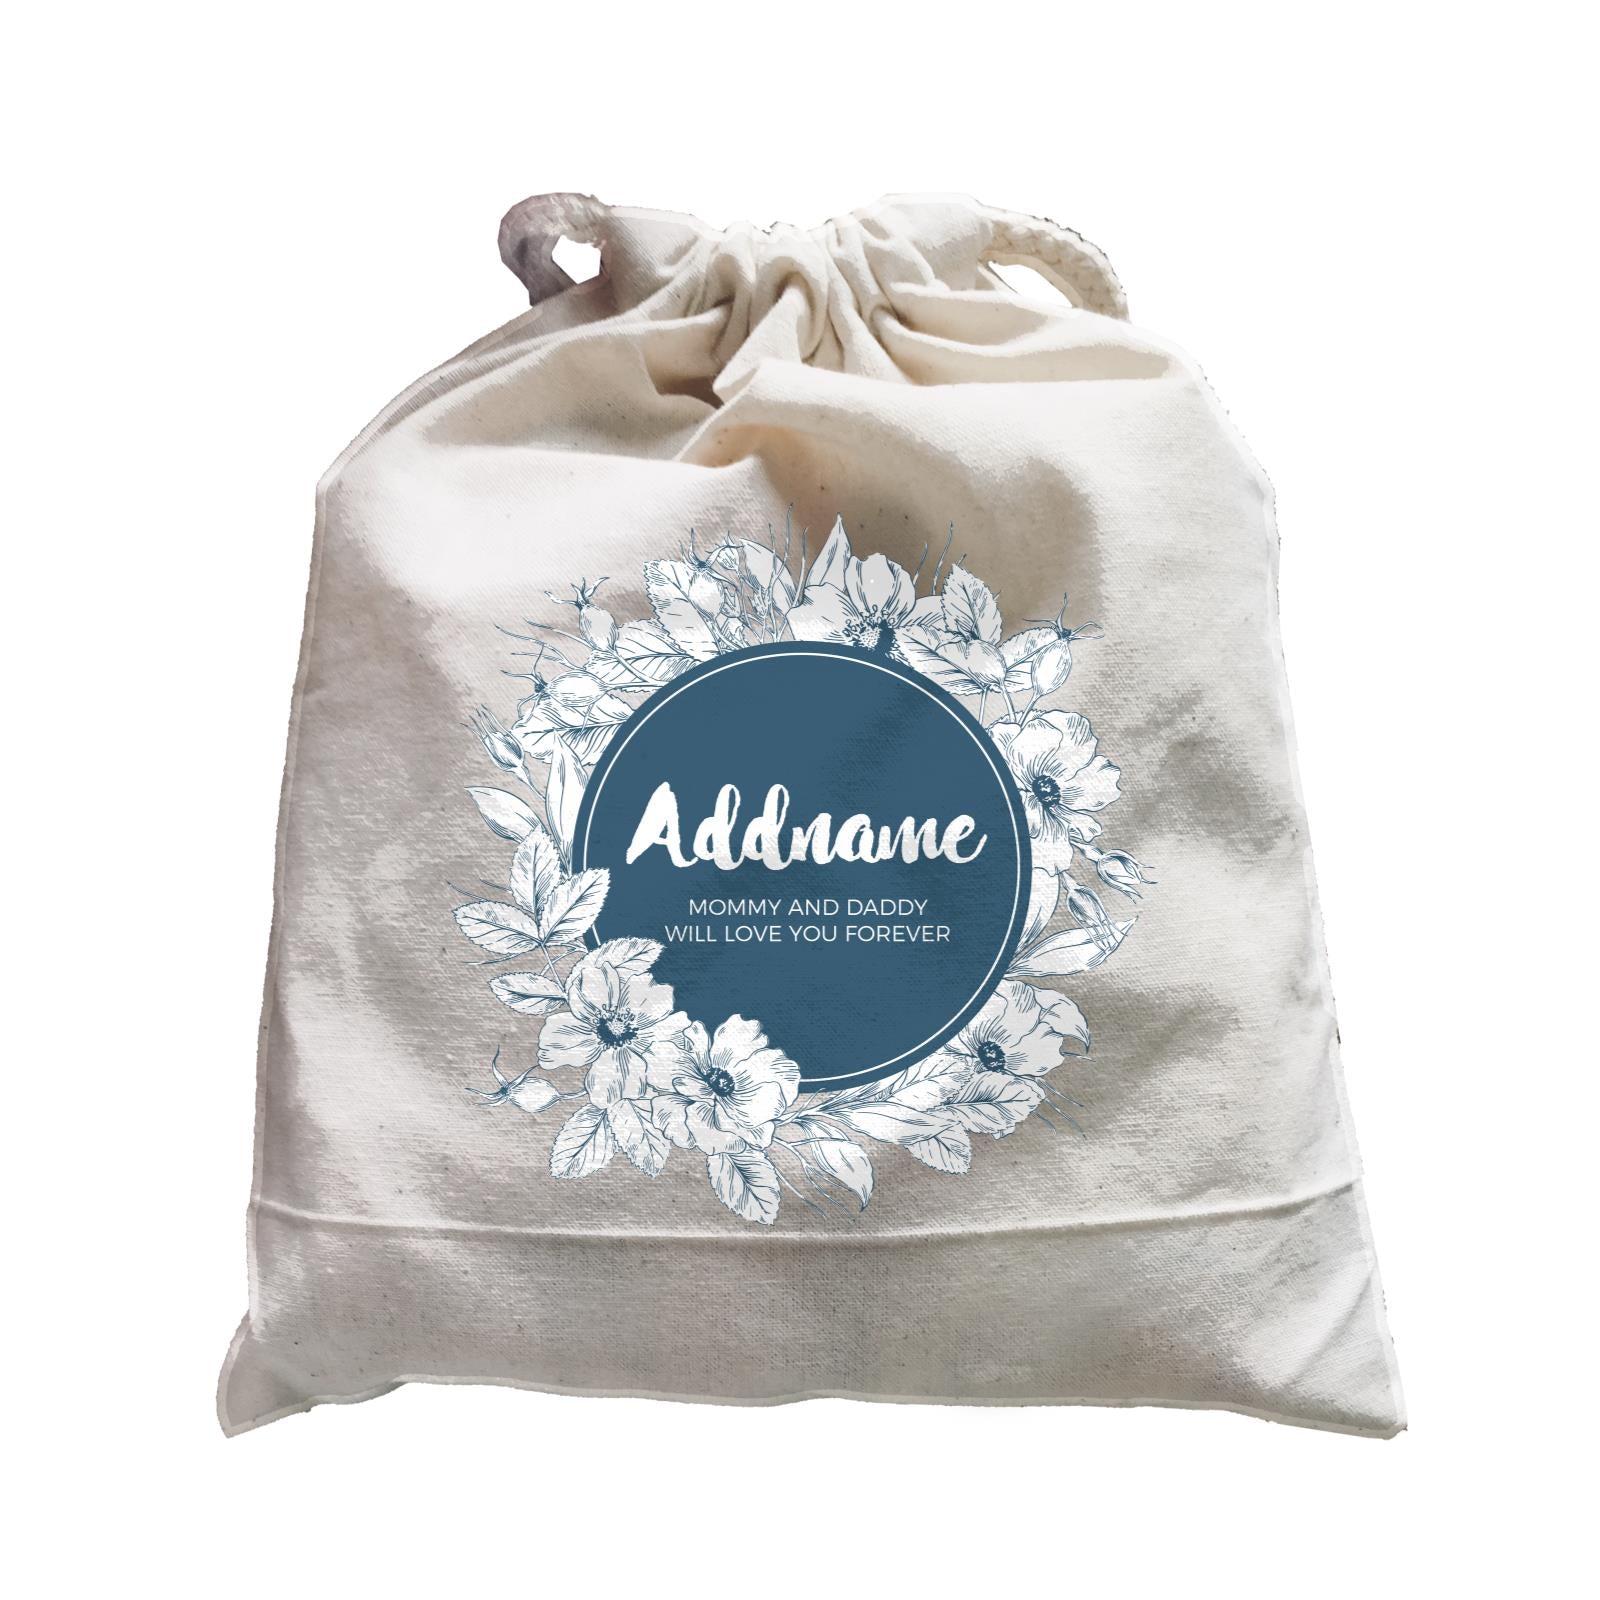 Navy Blue Flower Wreath Personalizable with Name and Text Satchel